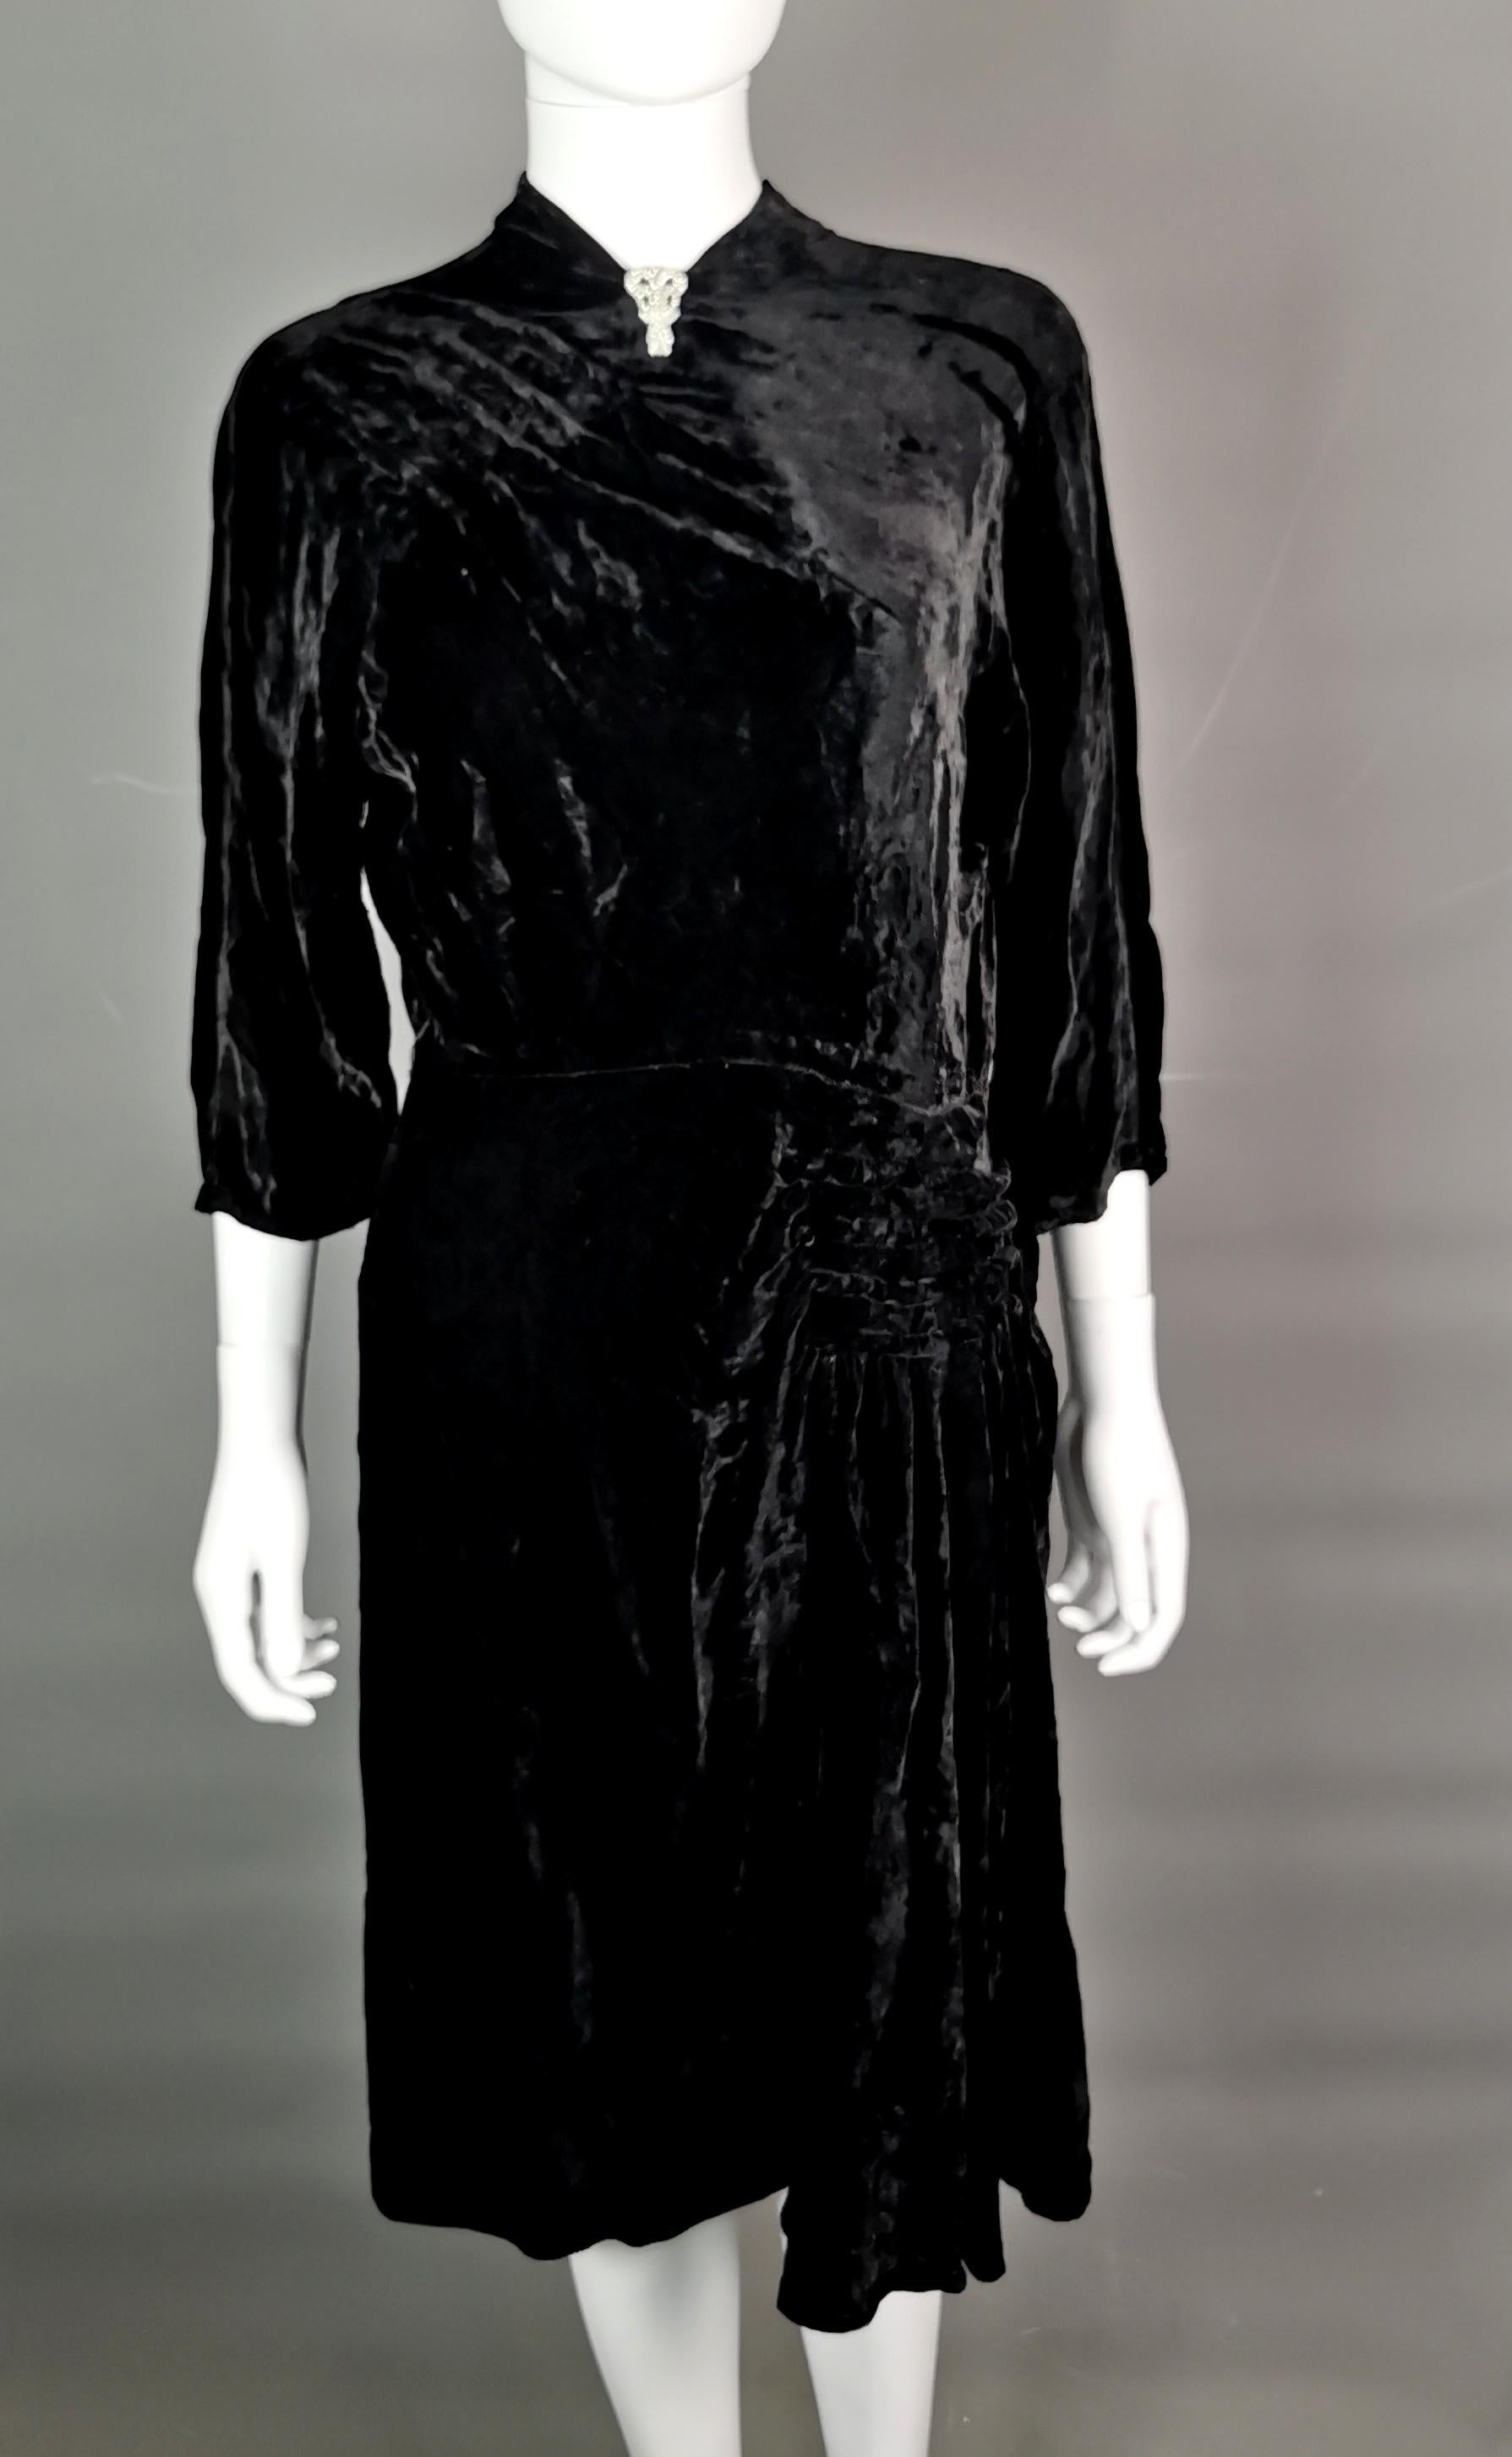 A gorgeous, vampy vintage 1930s Art Deco black velvet dress.

The dress has a very short cut out mandarin style collar with slightly sloped shoulders and the most gorgeous pin tuck pleat or ruching to the shoulder and hip on opposite sides.

A mid